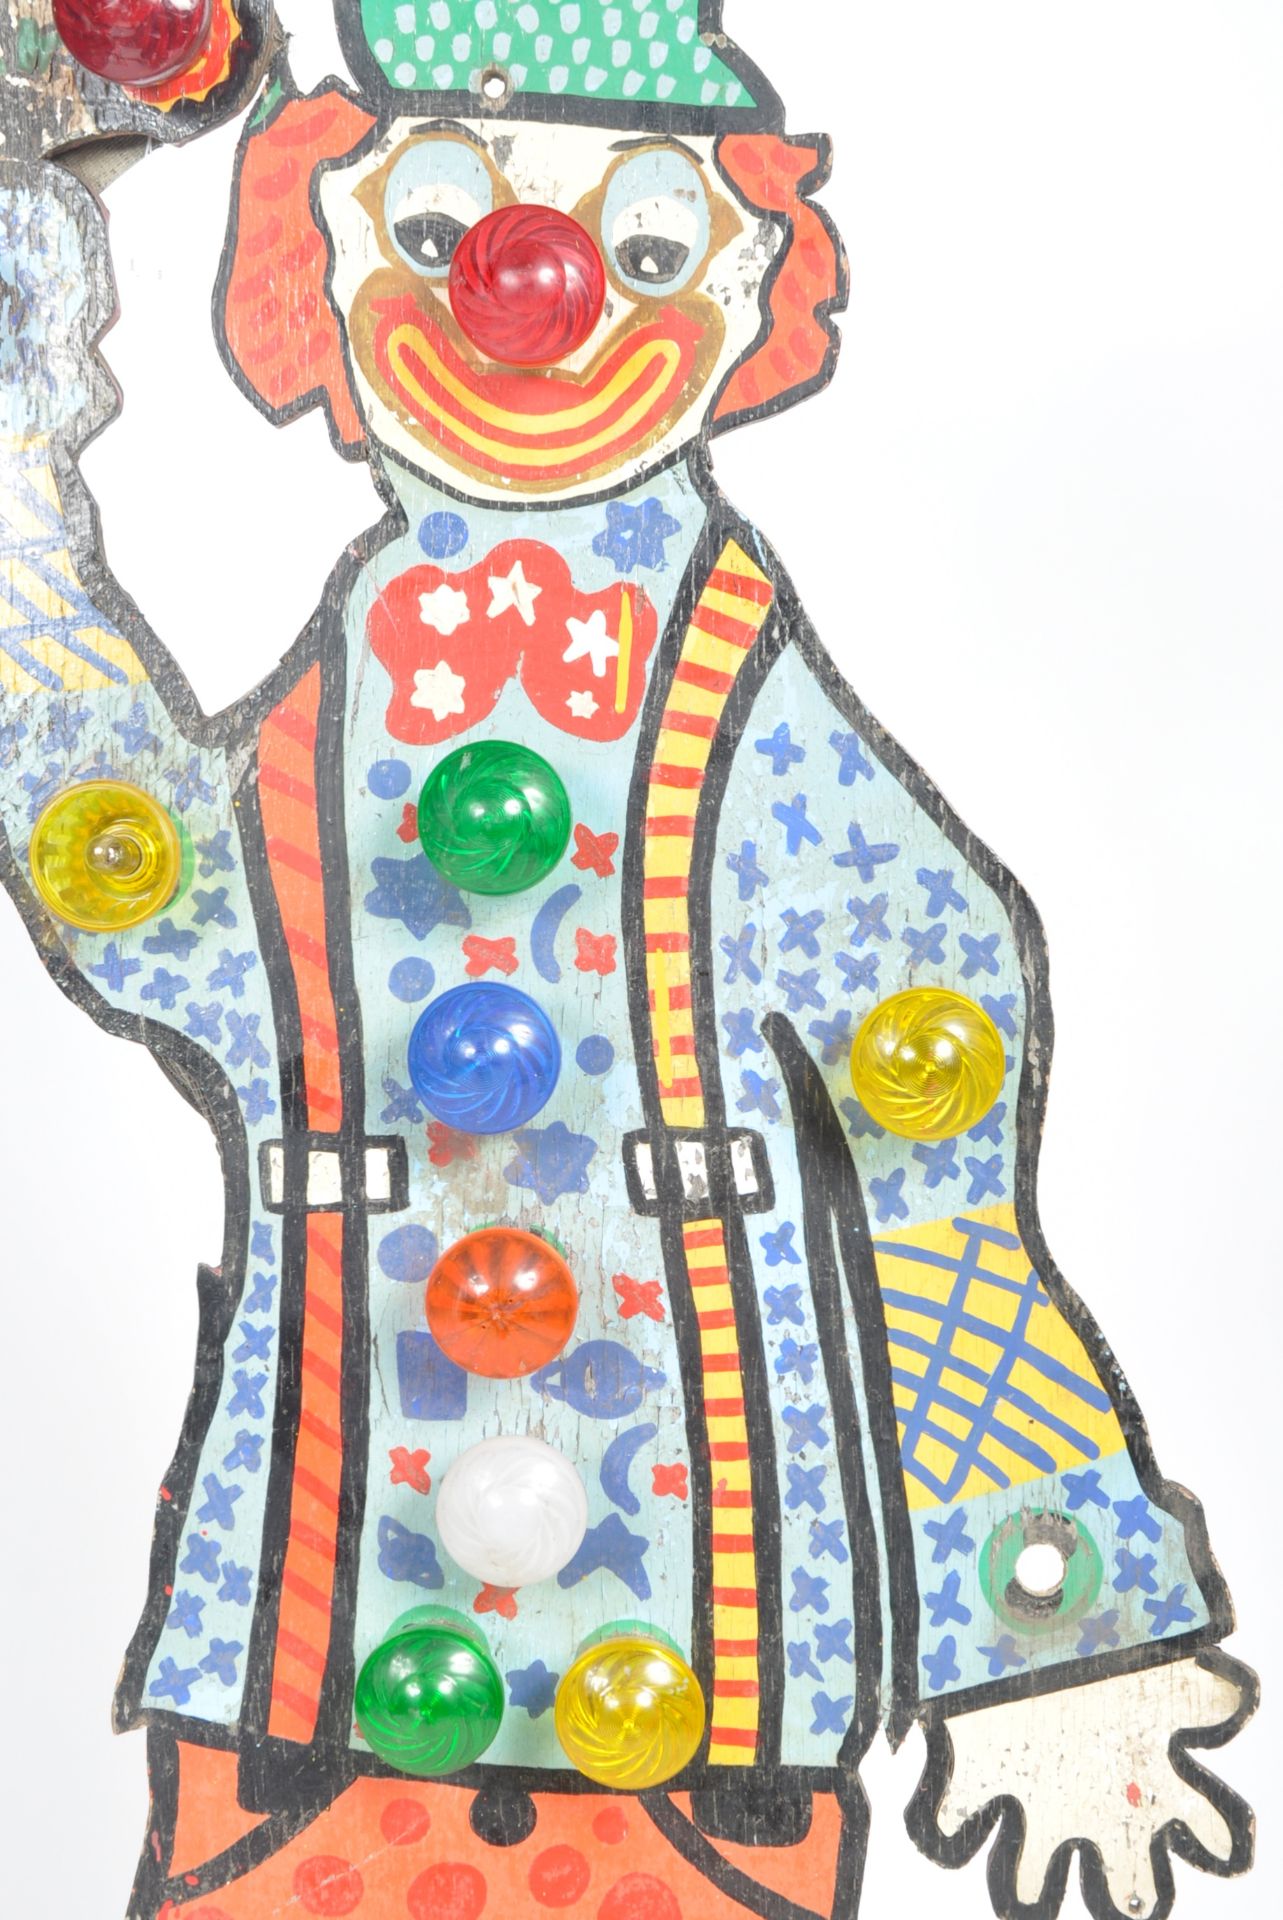 VINTAGE HAND PAINTED FAIRGROUND WOODEN CLOWN DISPLAY - Image 3 of 4